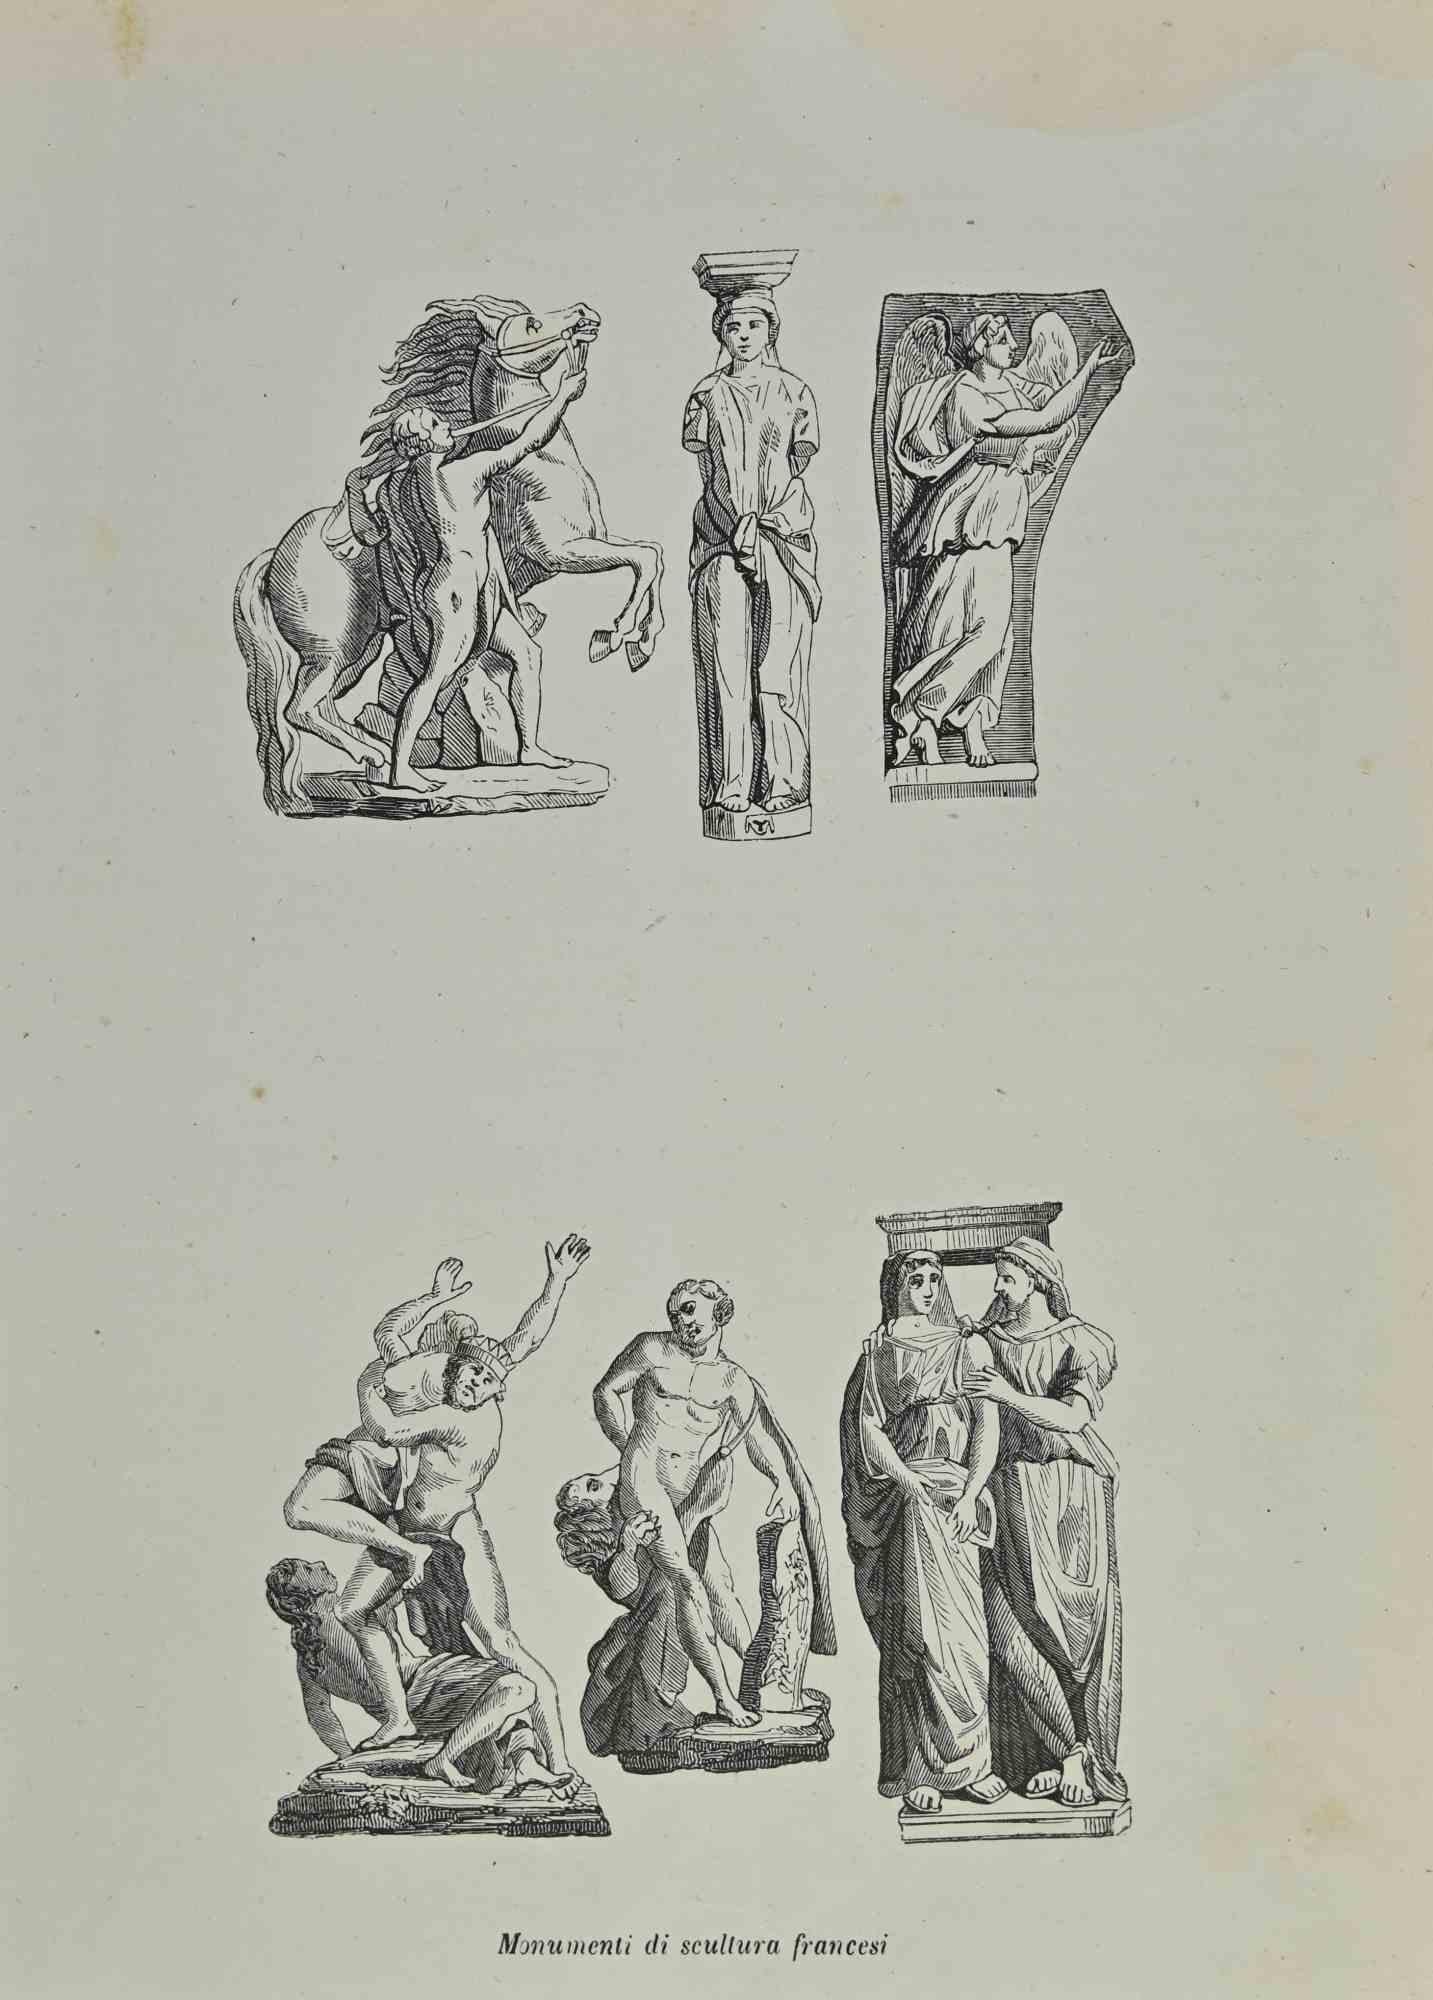 Monuments of French Sculpture is a lithograph made by Auguste Wahlen in 1844.

Good condition.

Drawing in black and white.

At the center of the artwork is the original title "Monumenti di scultura francesi".

The work is part of Suite Moeurs,